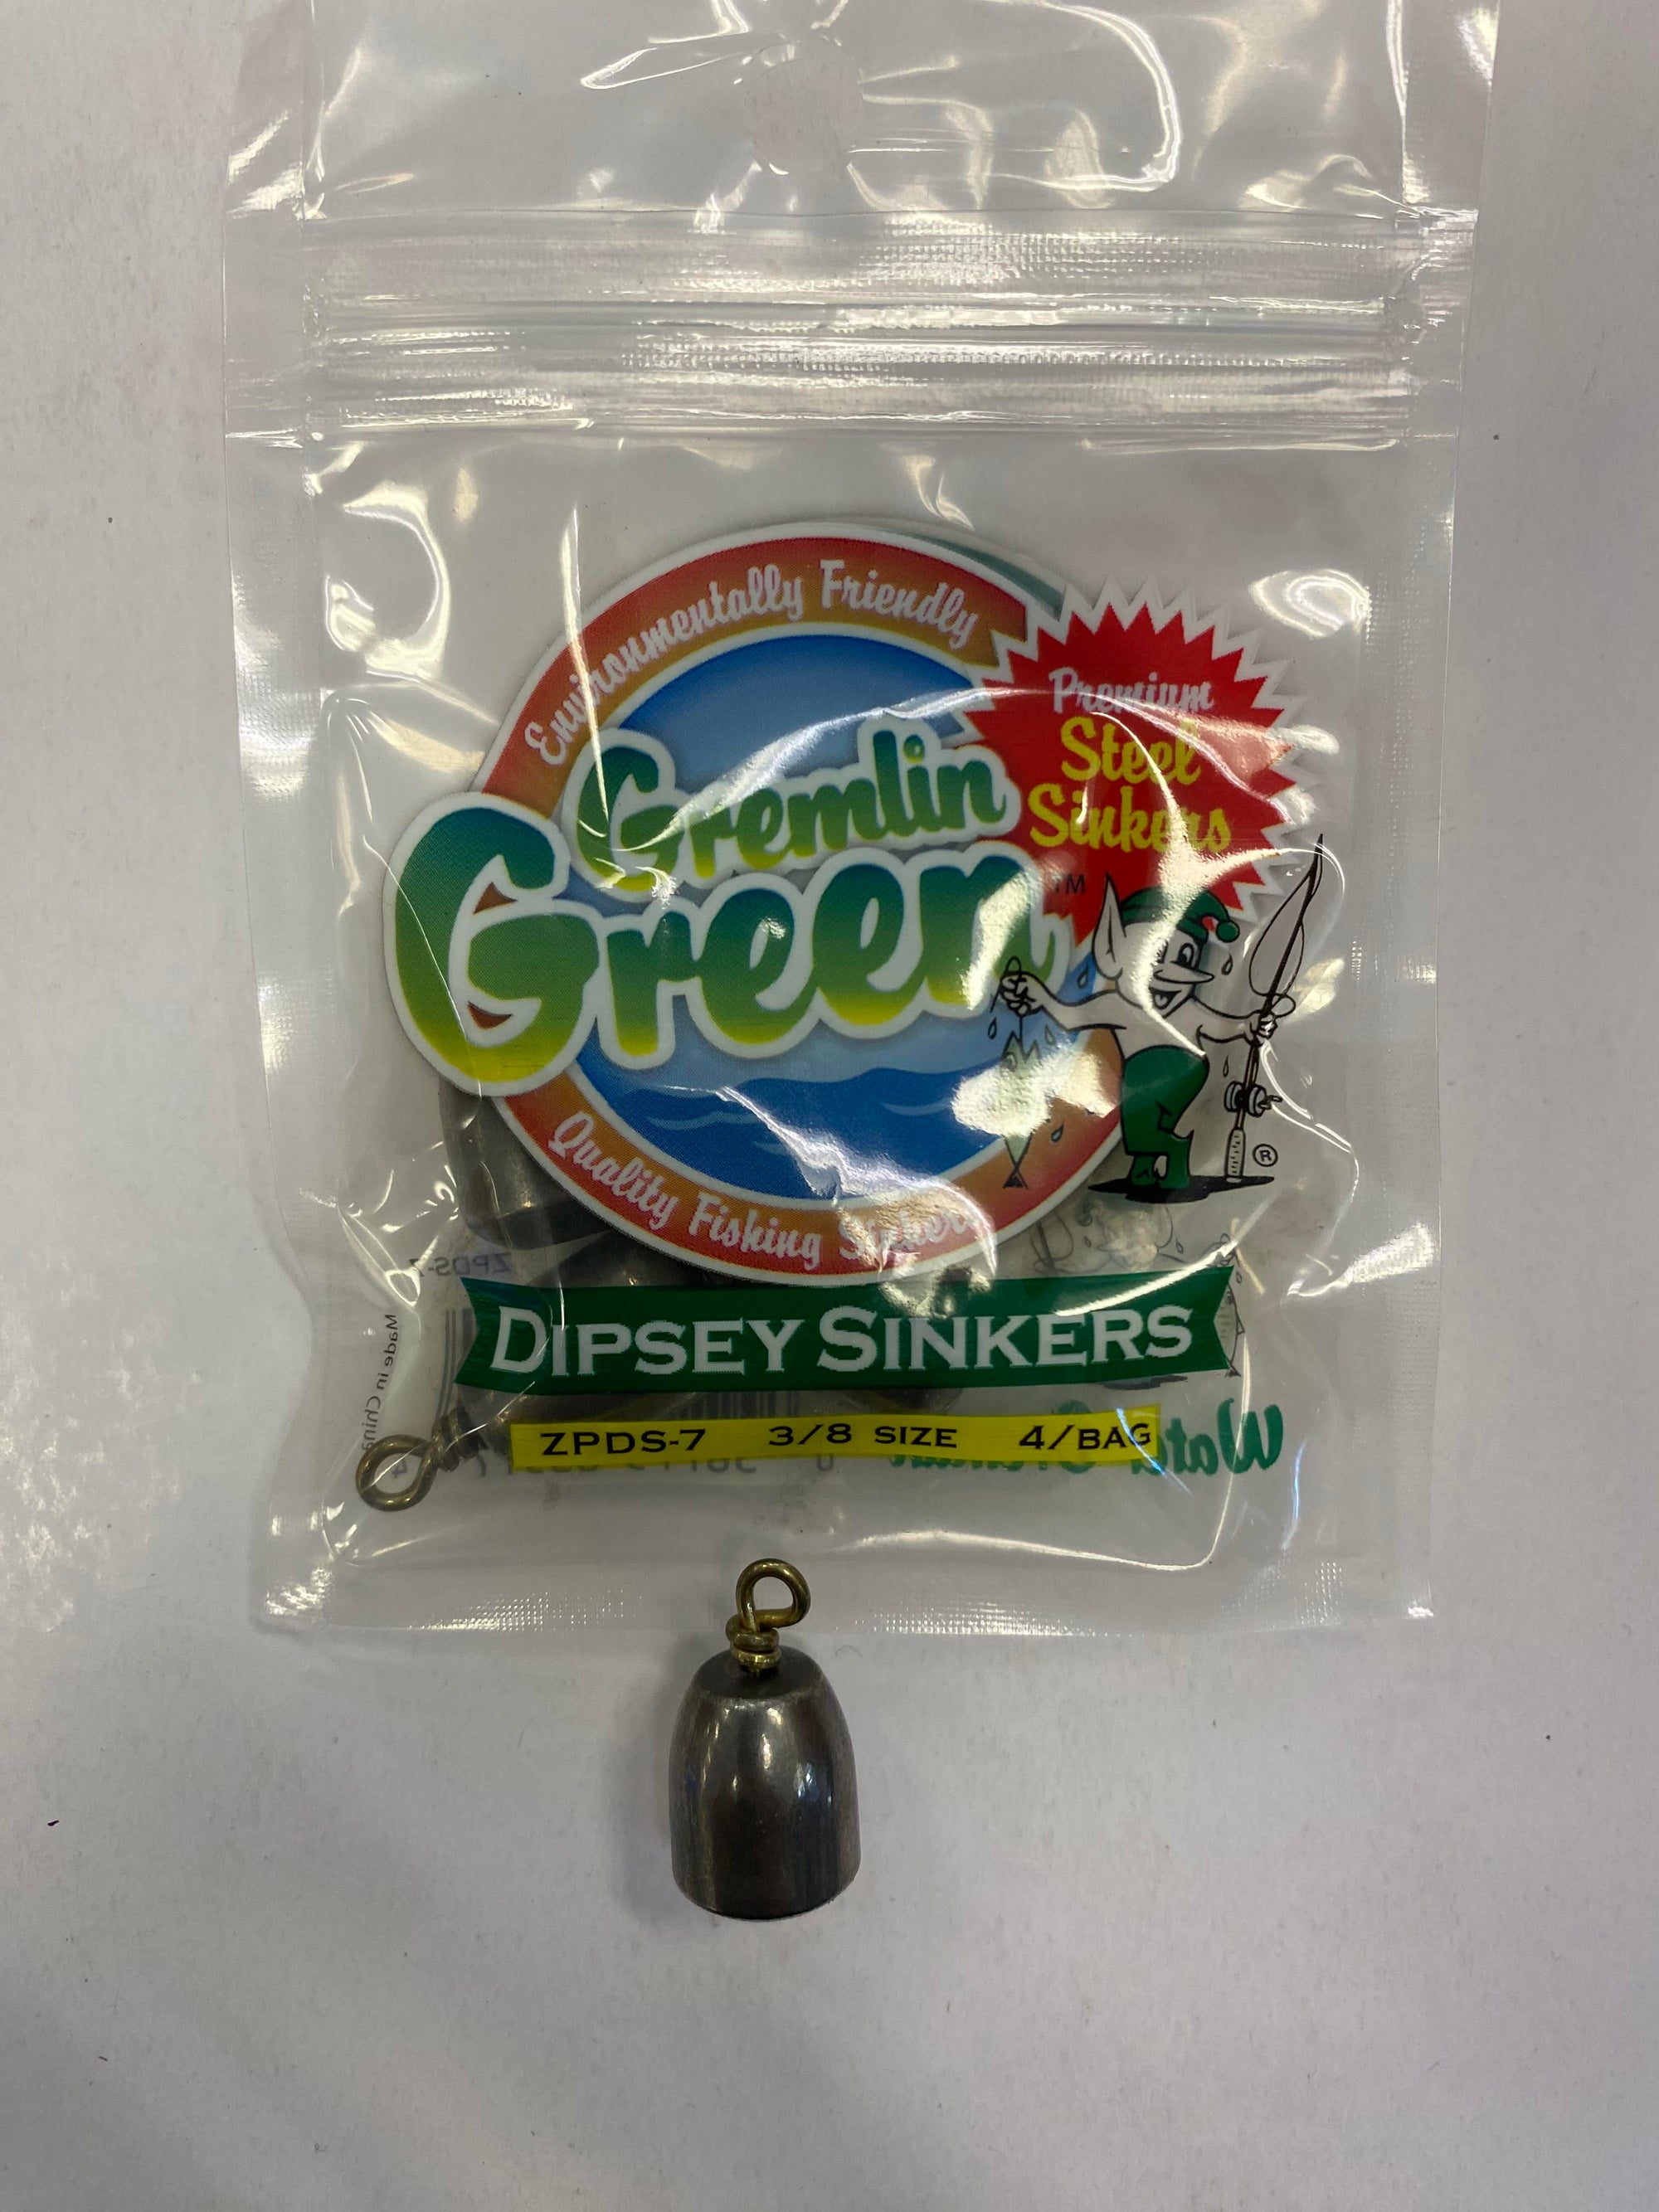 Dipsey Sinkers